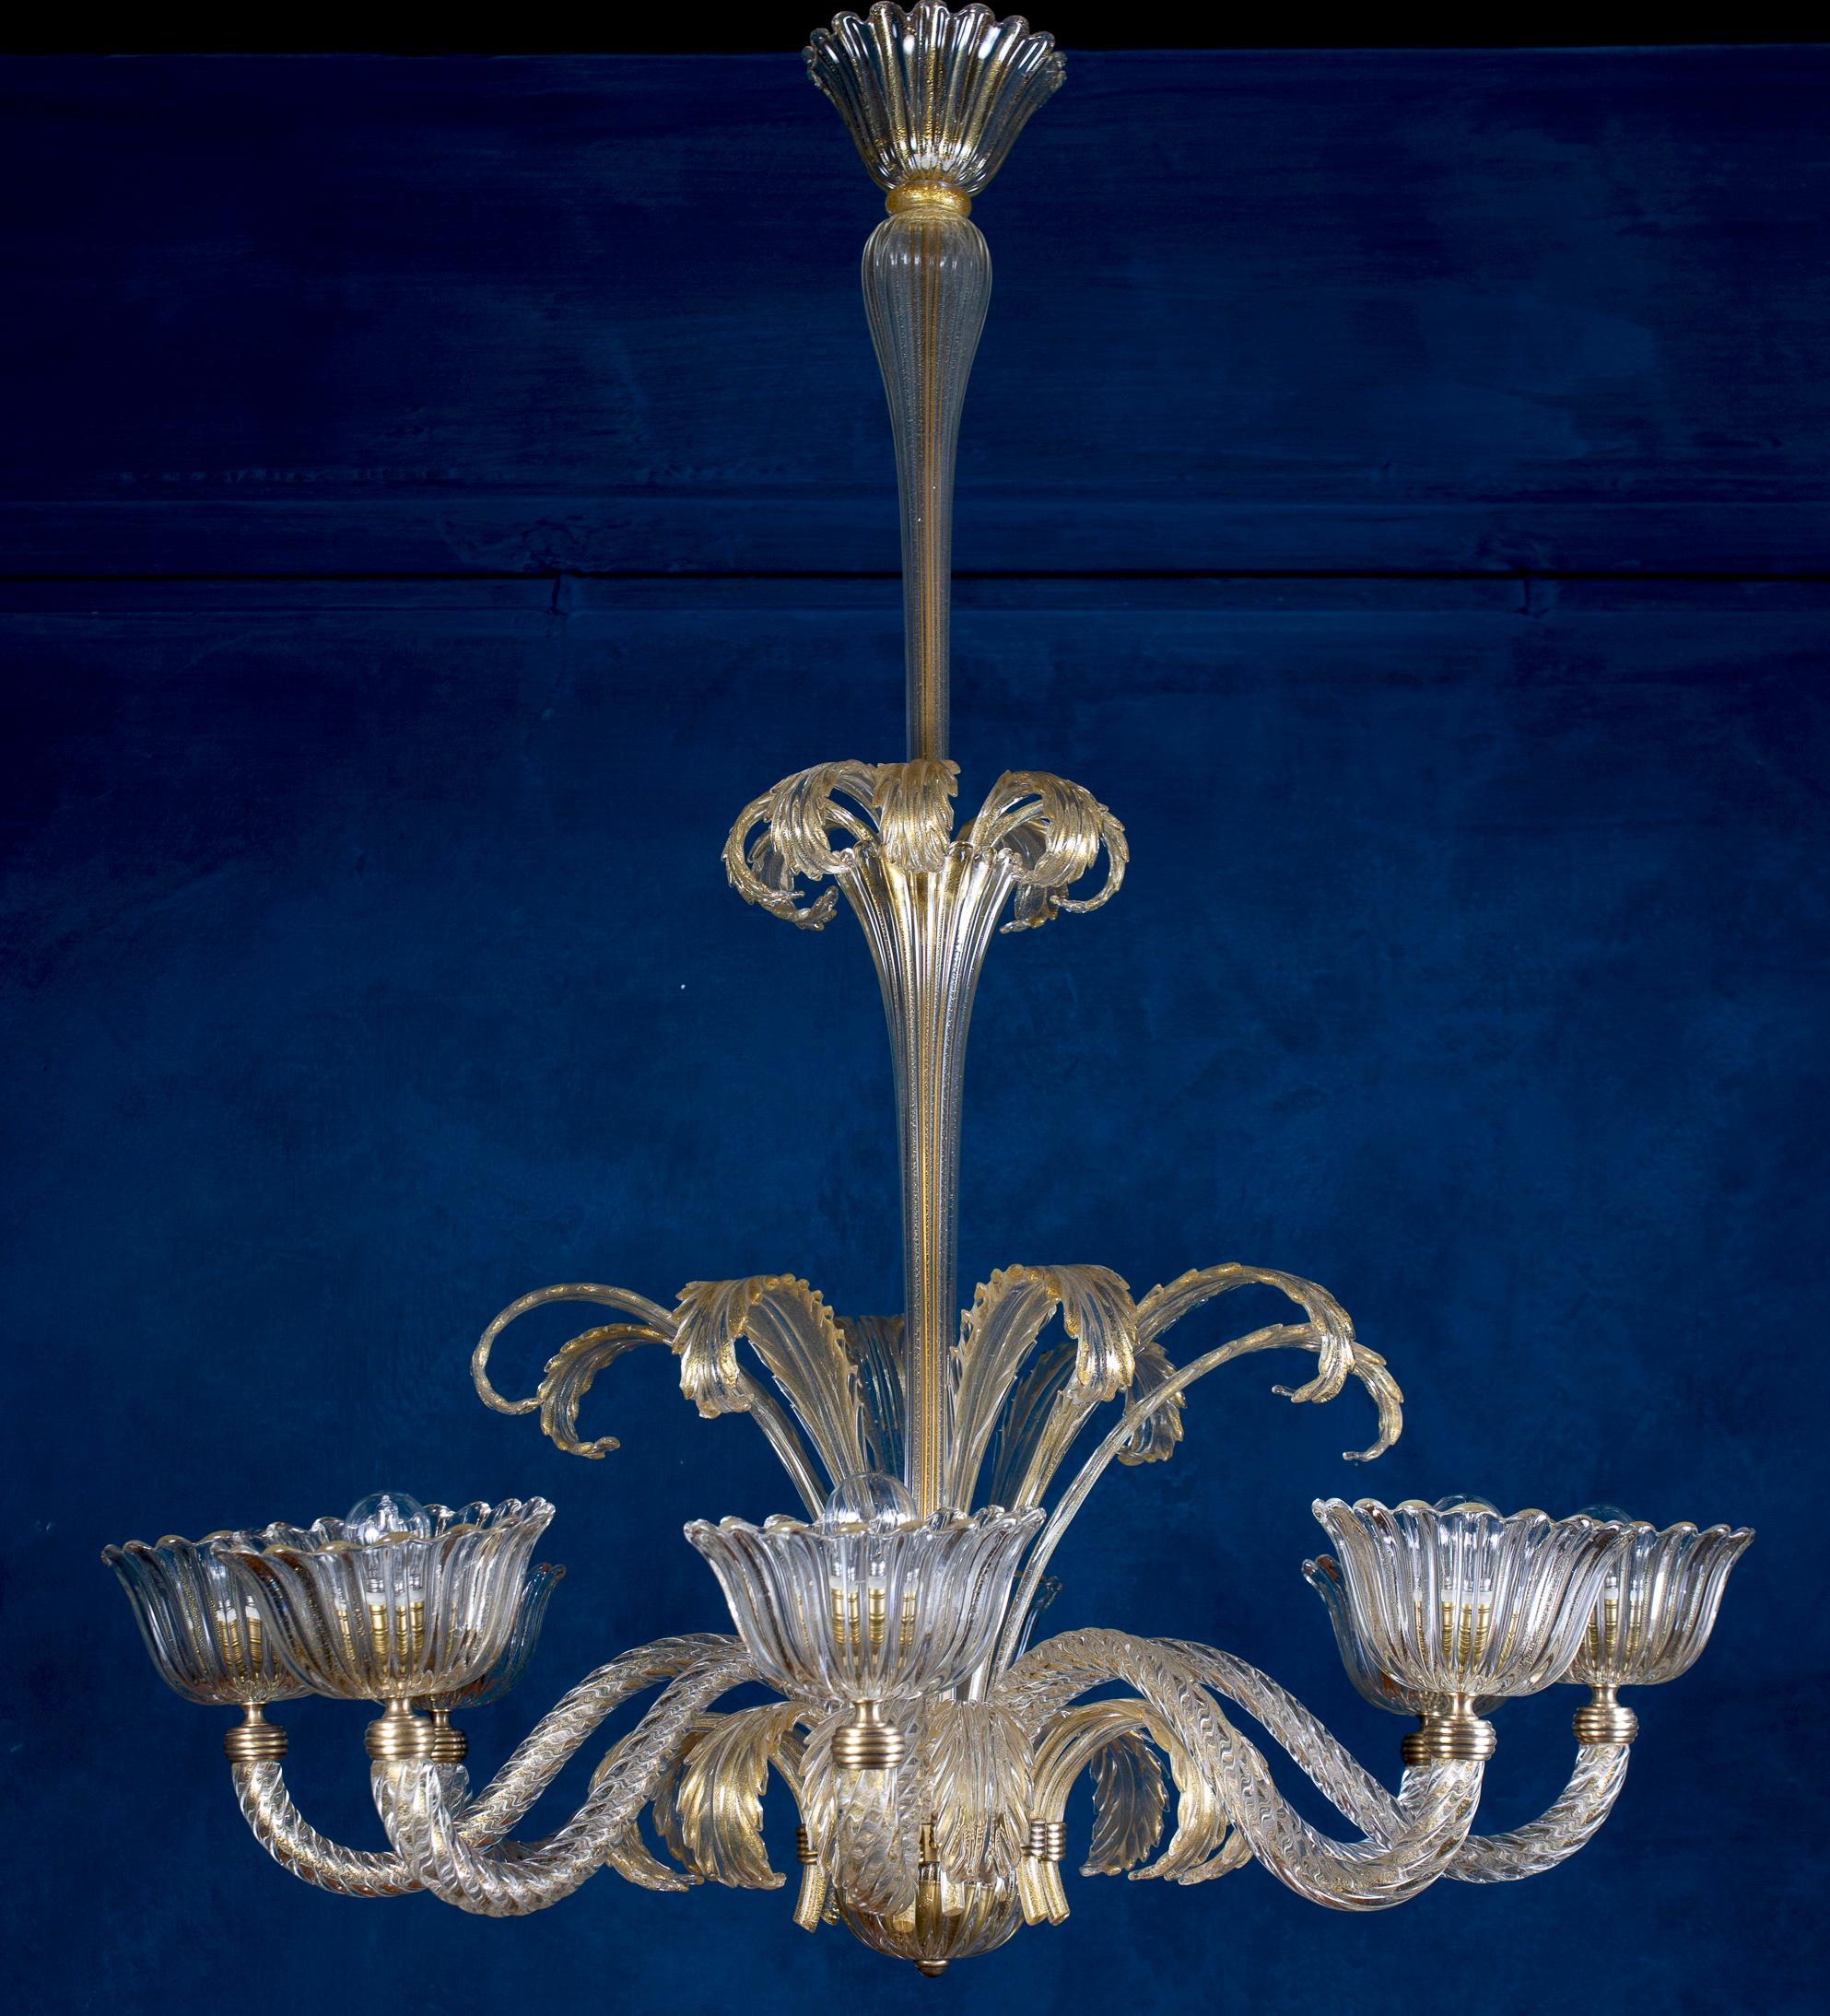 Exceptional eight-shade Murano glass chandelier with gold intrusion . Elegant shaped fine quality  brass mount, by Ercole Barovier.  Unique Art Deco beauty in excellent vintage condition.
Eight  E 27 light bulbs compatible with US standards.
 The